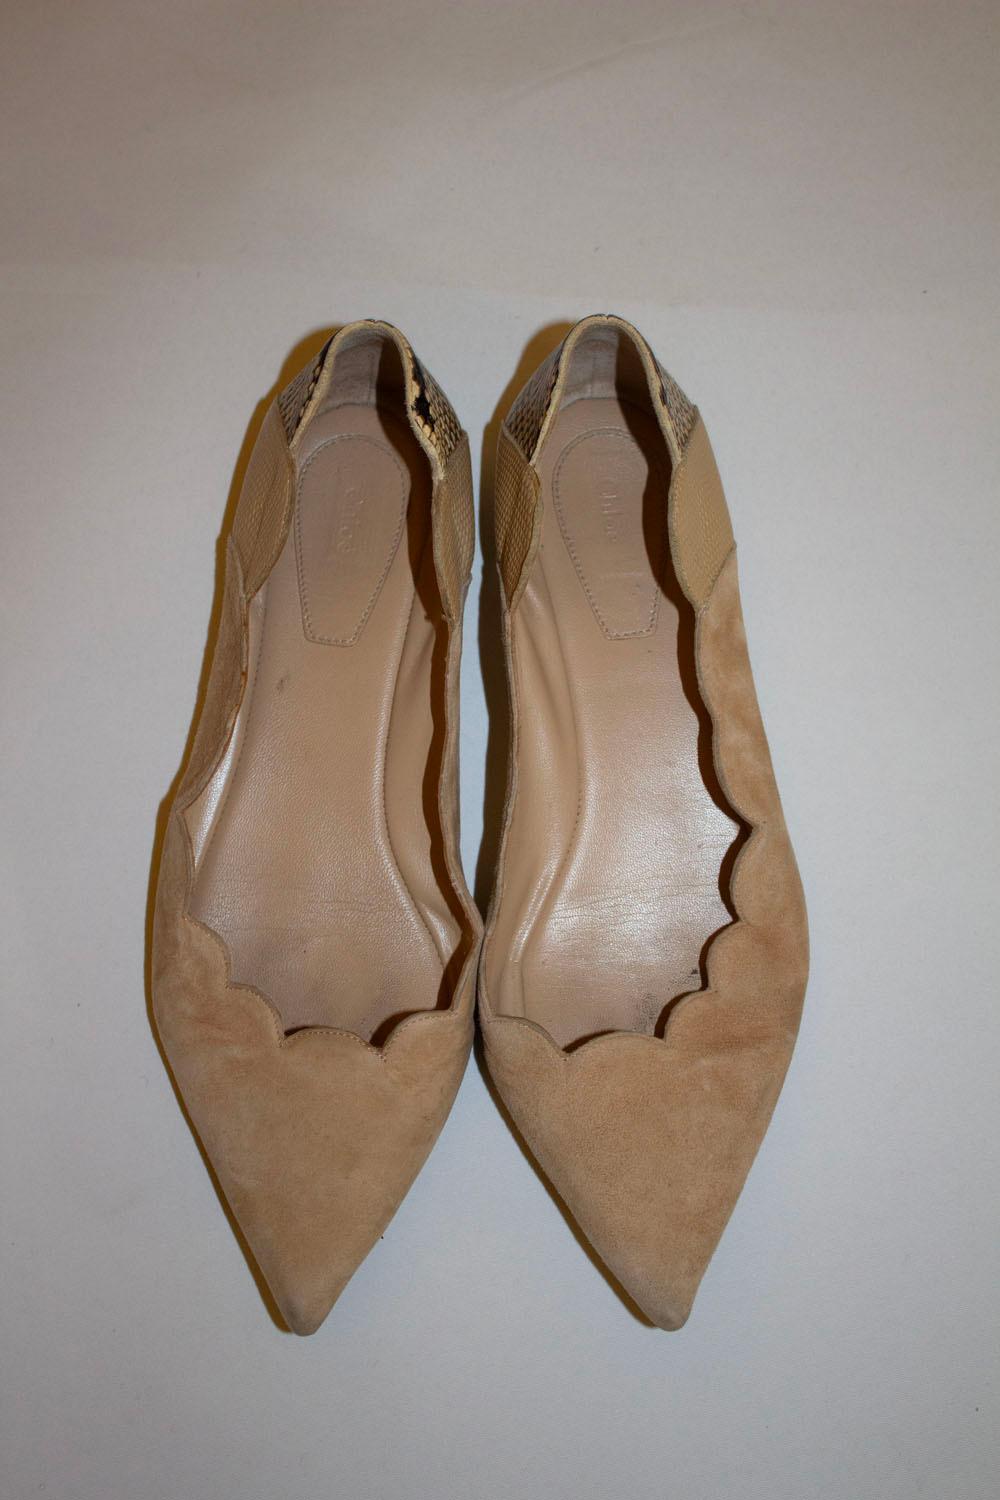 A great pair of flat pumps for Spring by Chloe. The shoes are in a light beige suede with snakeskin heel back. The have leather soles. Size 38 1/2 . Made in Italy.